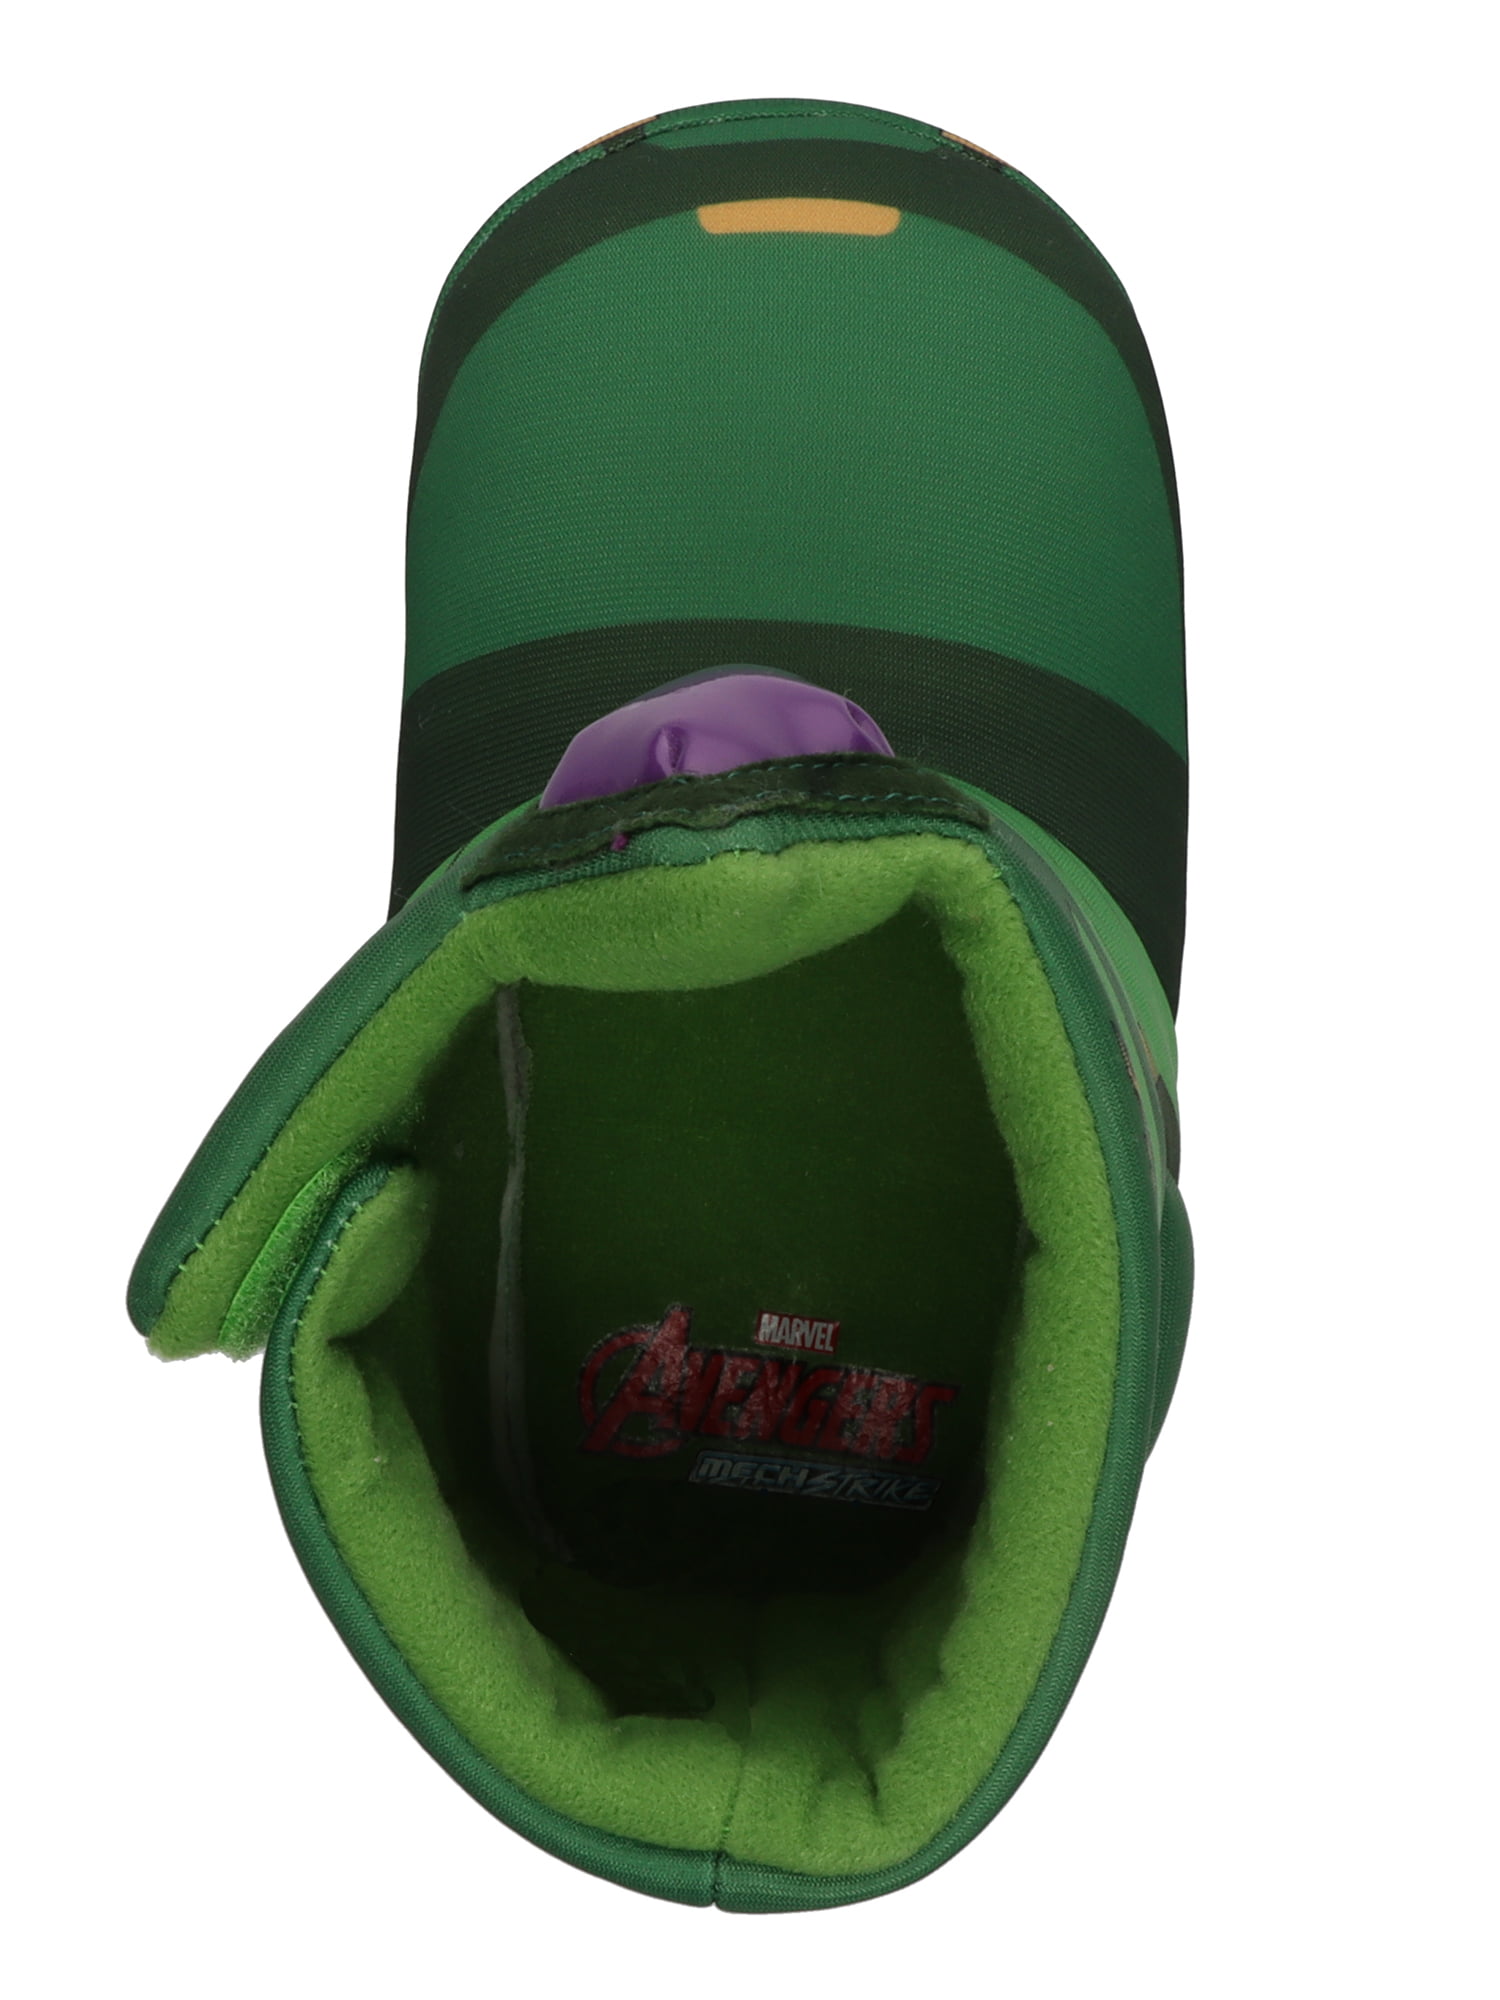 INCREDIBLE HULK slippers for kids | Shopee Philippines